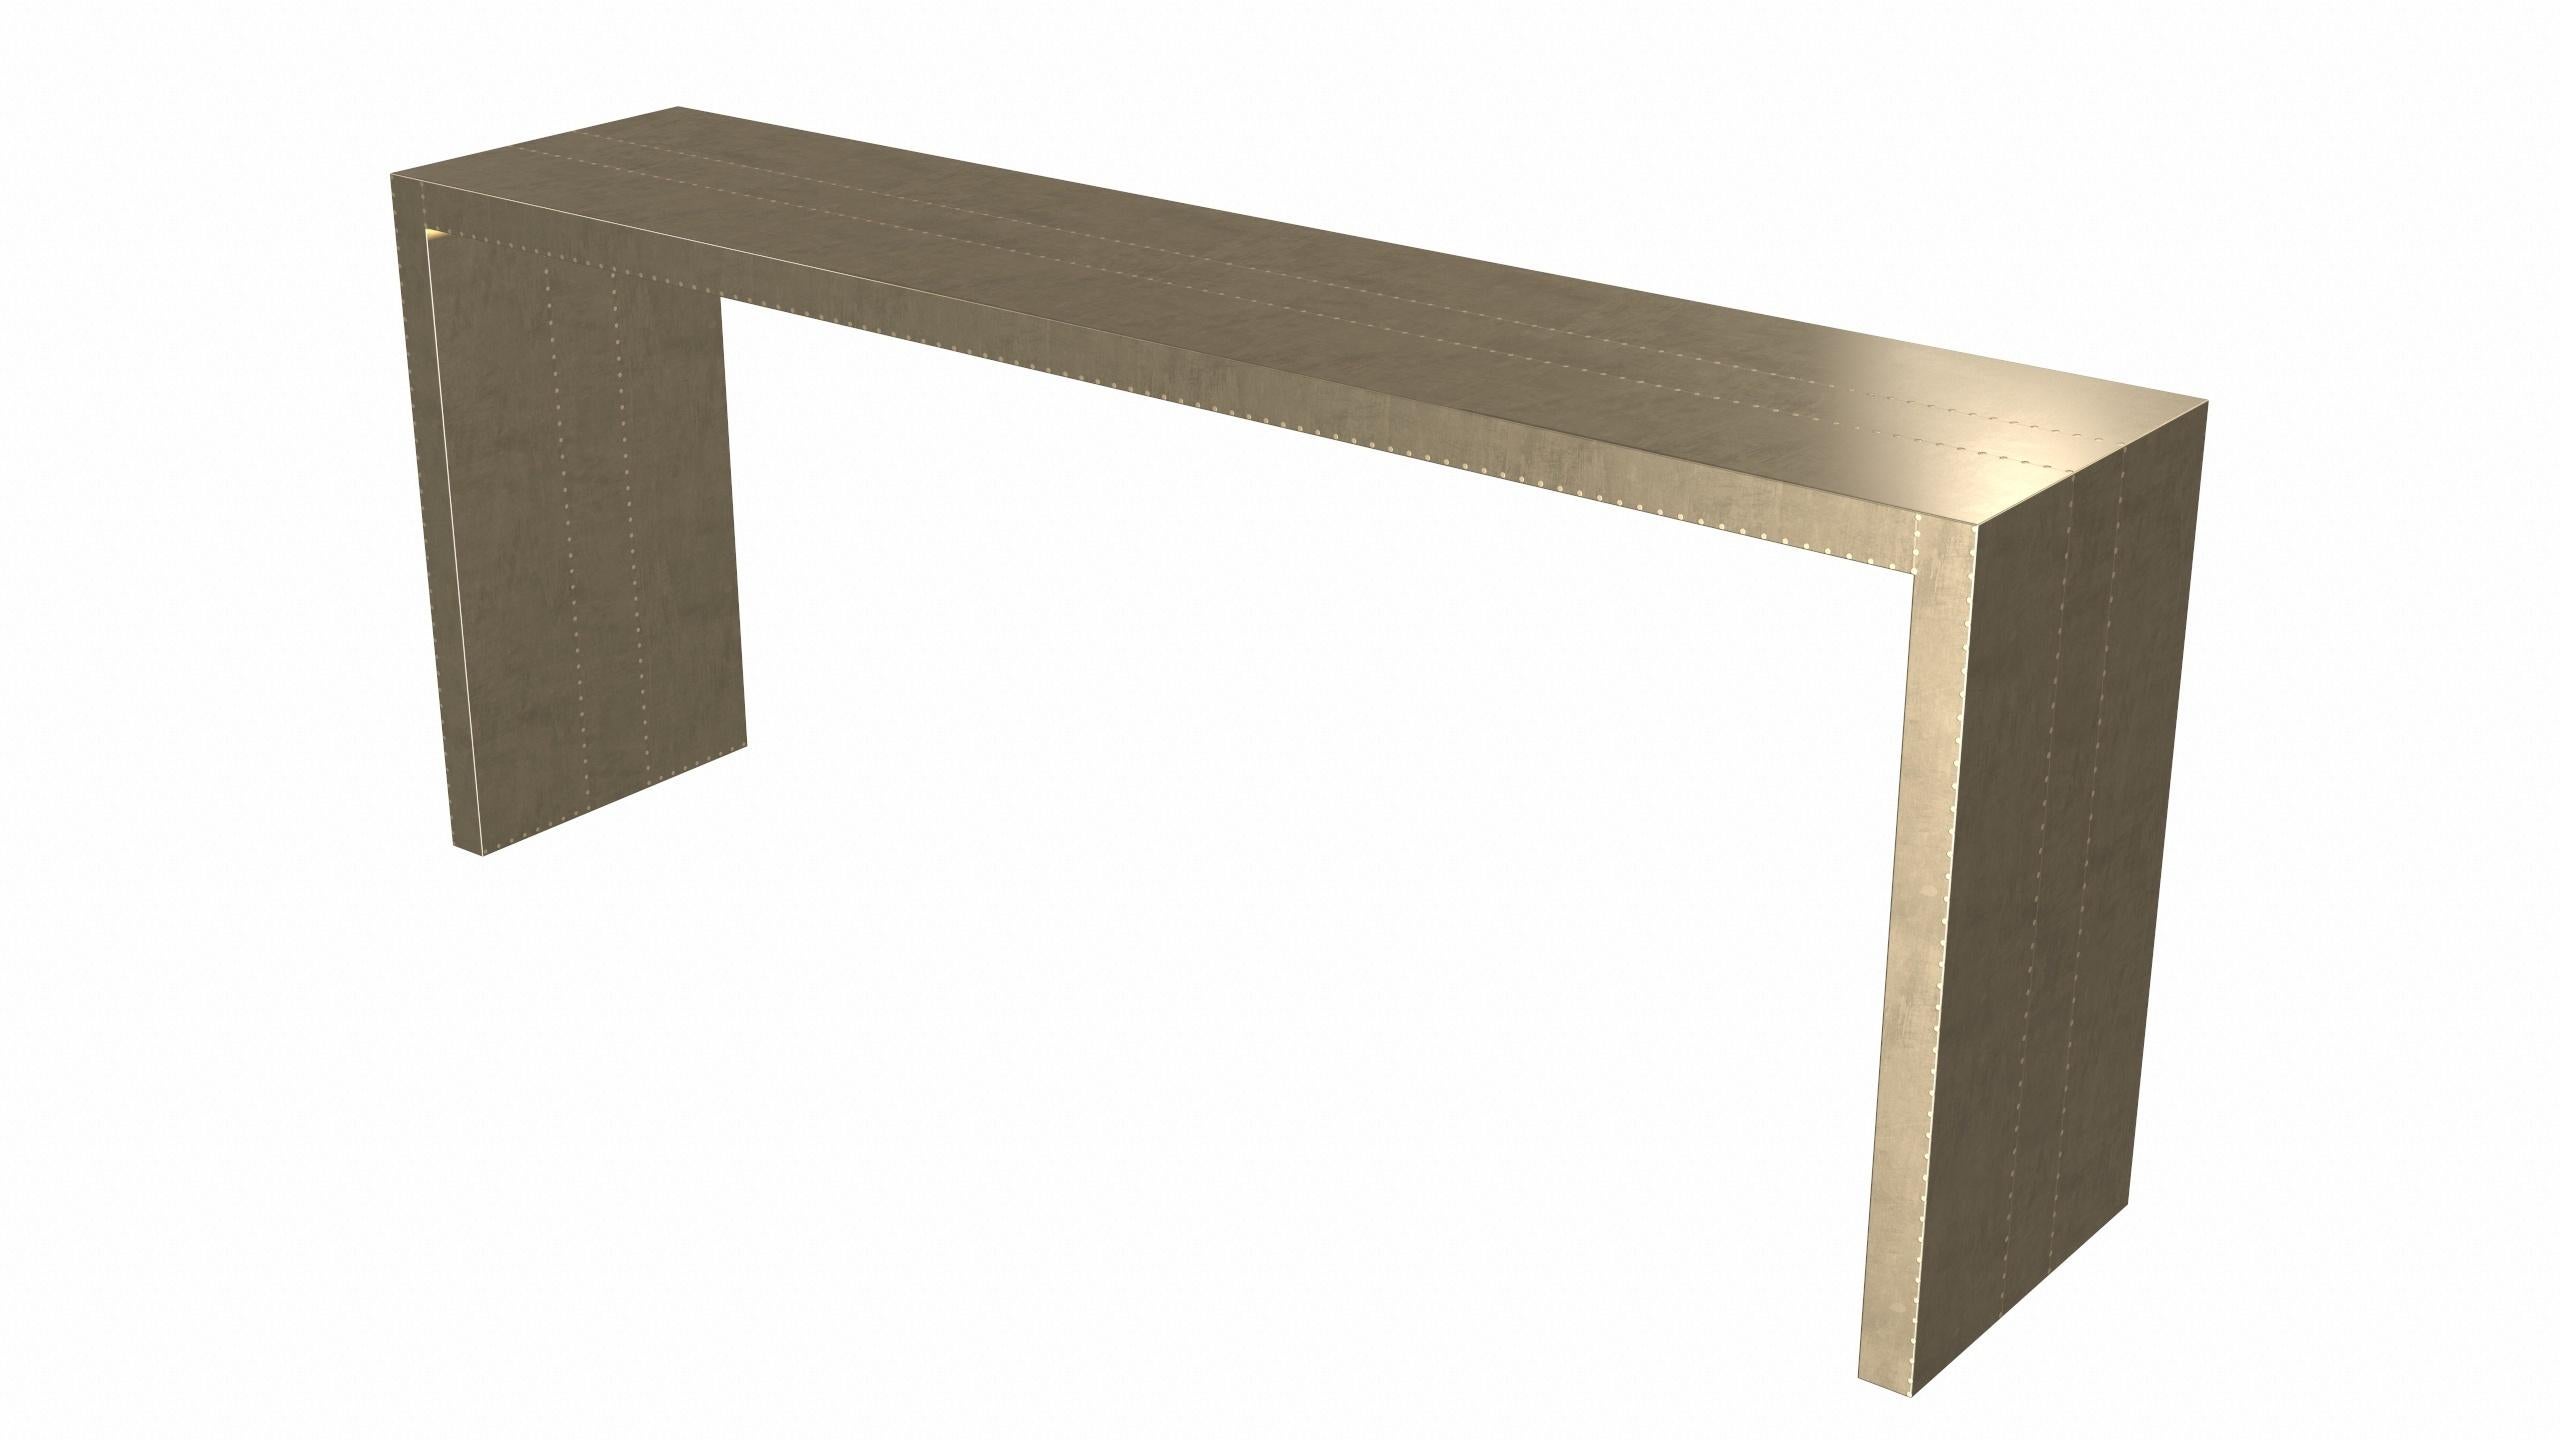 Contemporary Art Nouveau Tray Tables Rectangular Console in Smooth Brass by Alison Spear For Sale